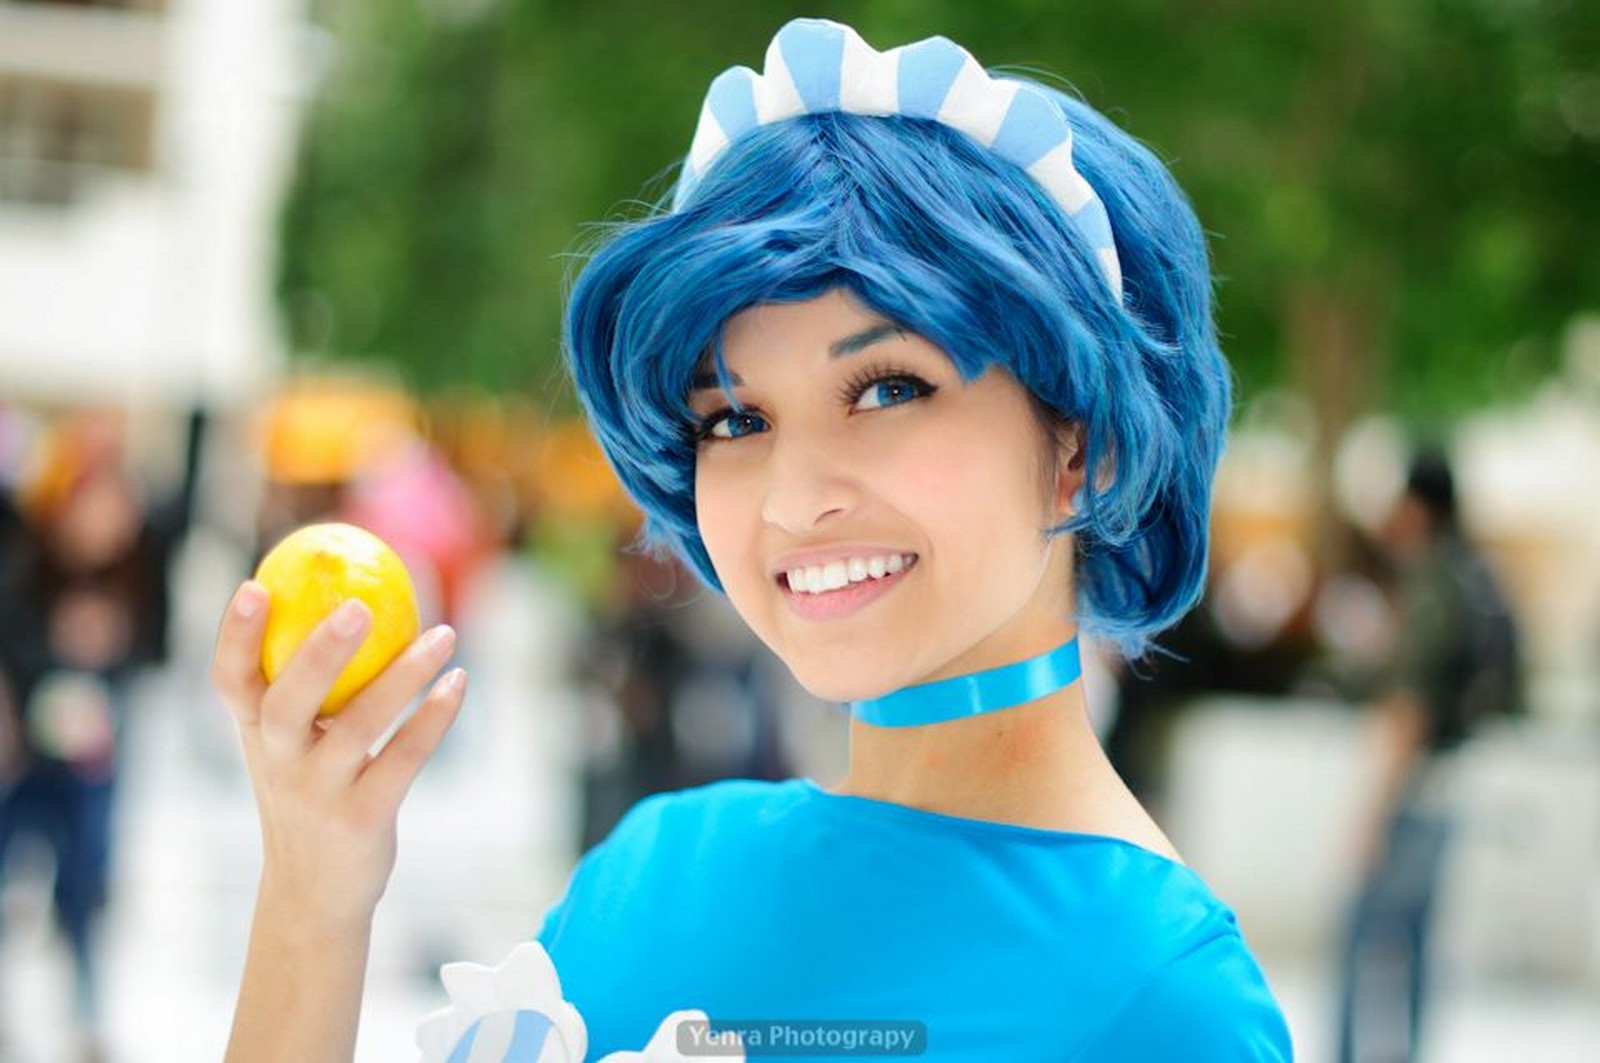 [Misc] Post Pictures of the Most Accurate Senshi Cosplay  84842-659311e909d7fc388e0eac23bf21e045